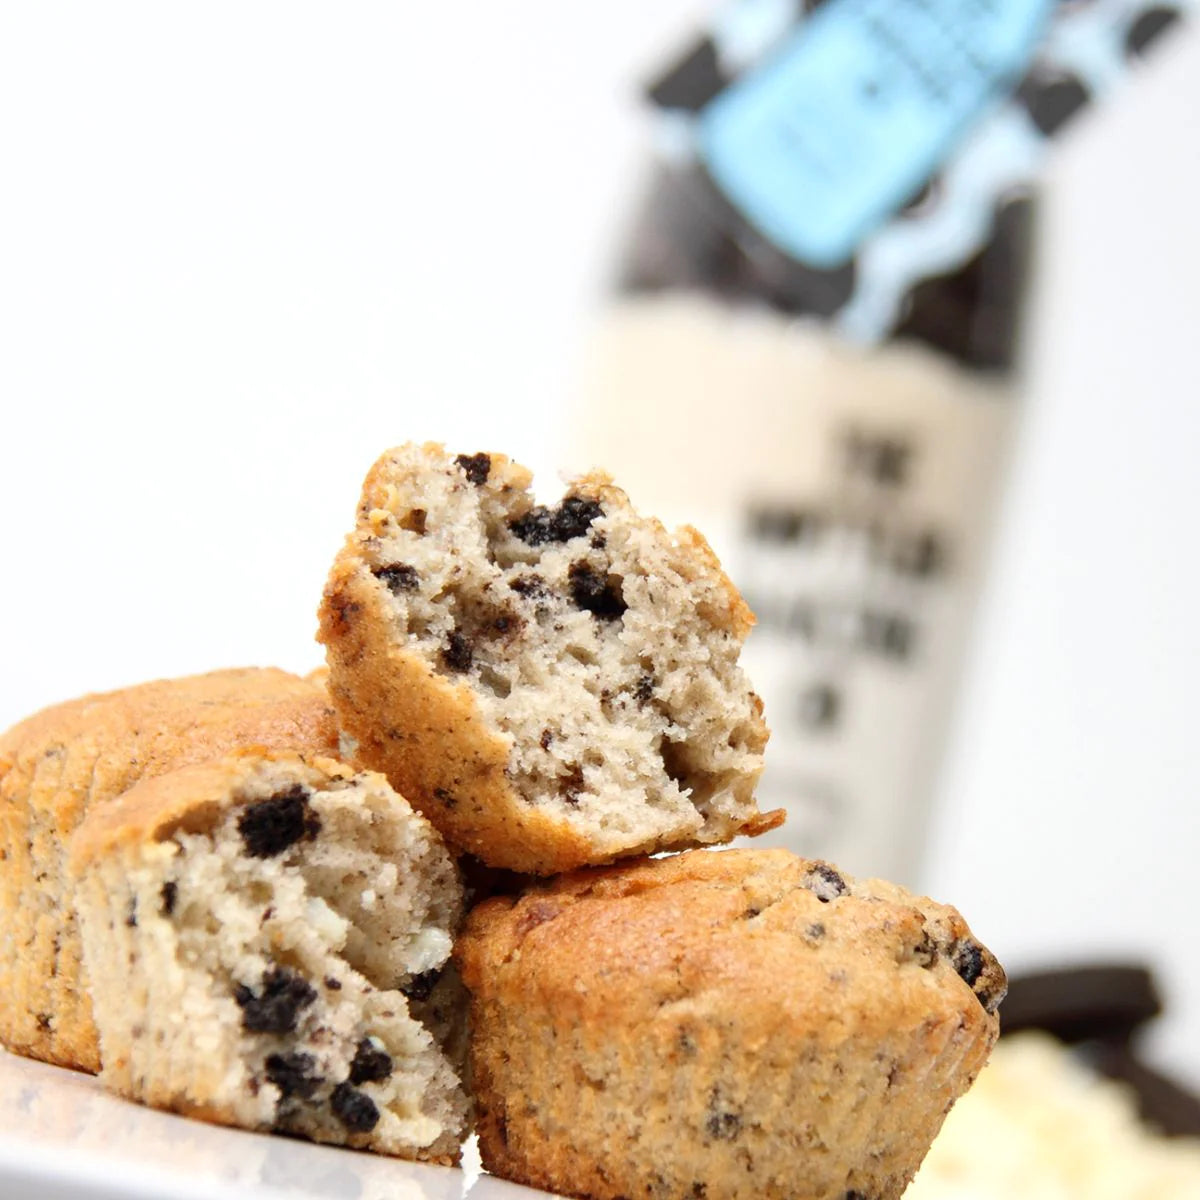 The Bottled Baking Co. | Cookies Crème Muffin Baking Mix by Weirs of Baggot Street